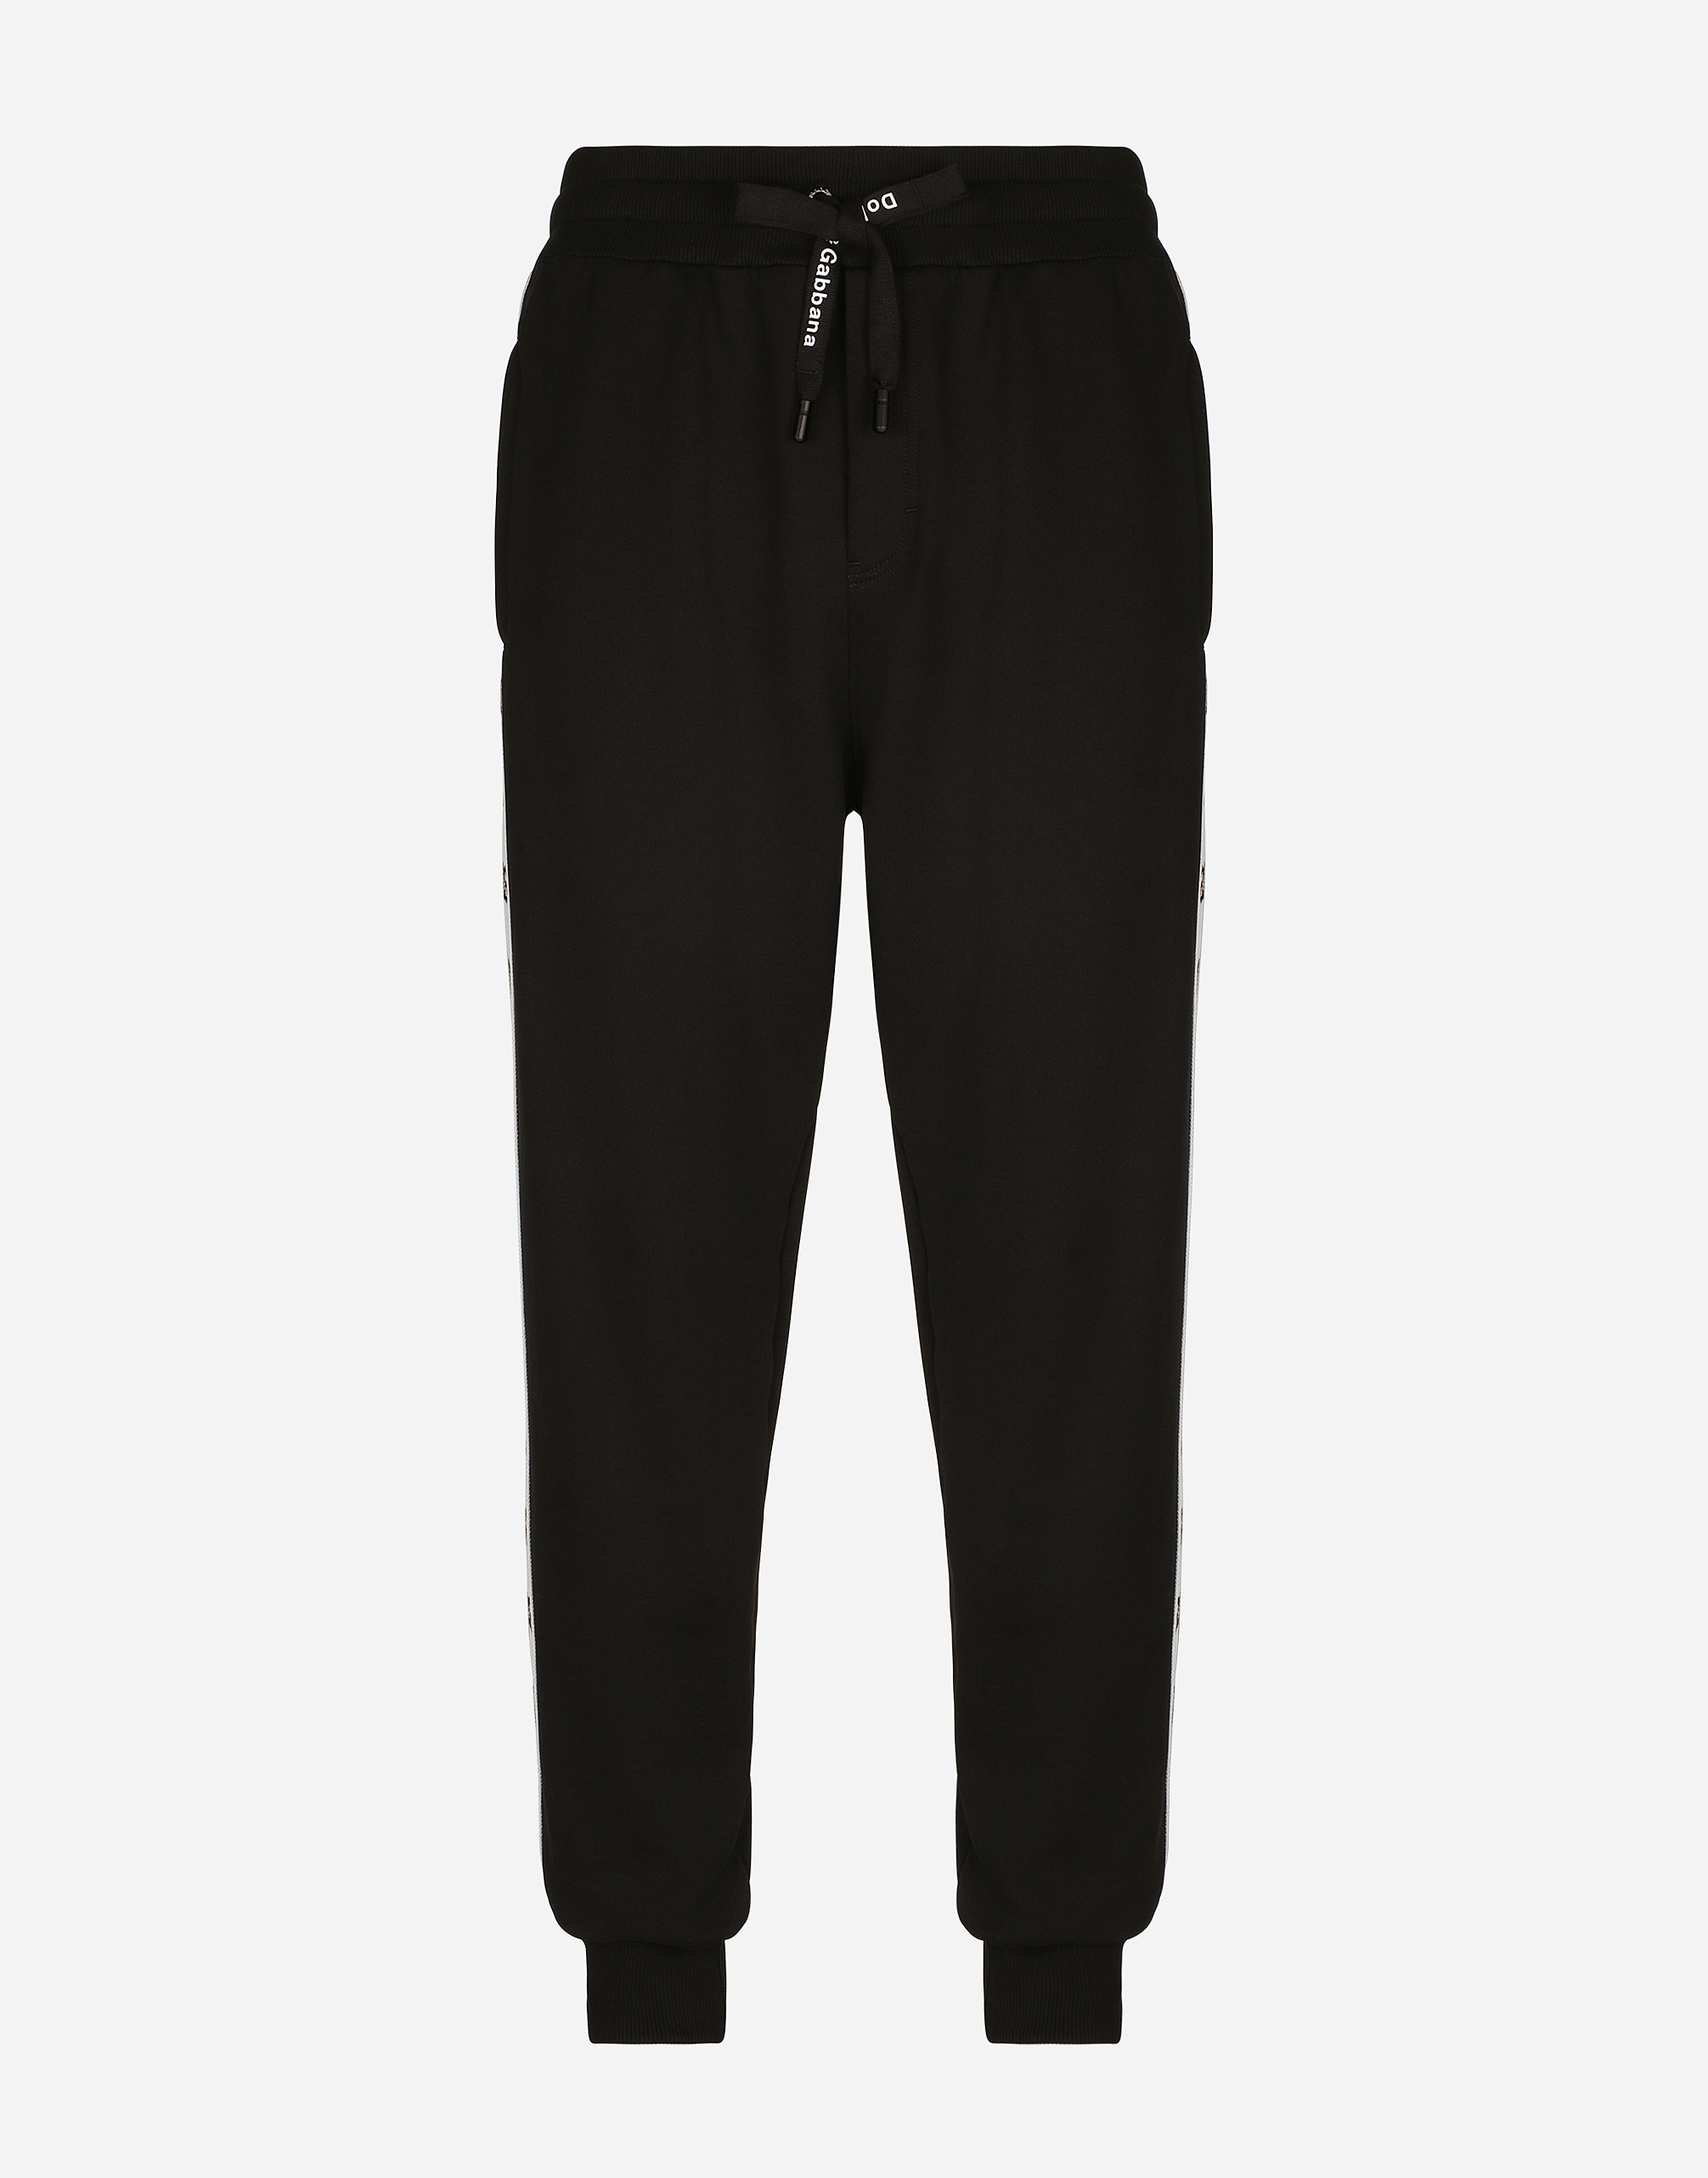 Jersey jogging pants with branded bands in Black